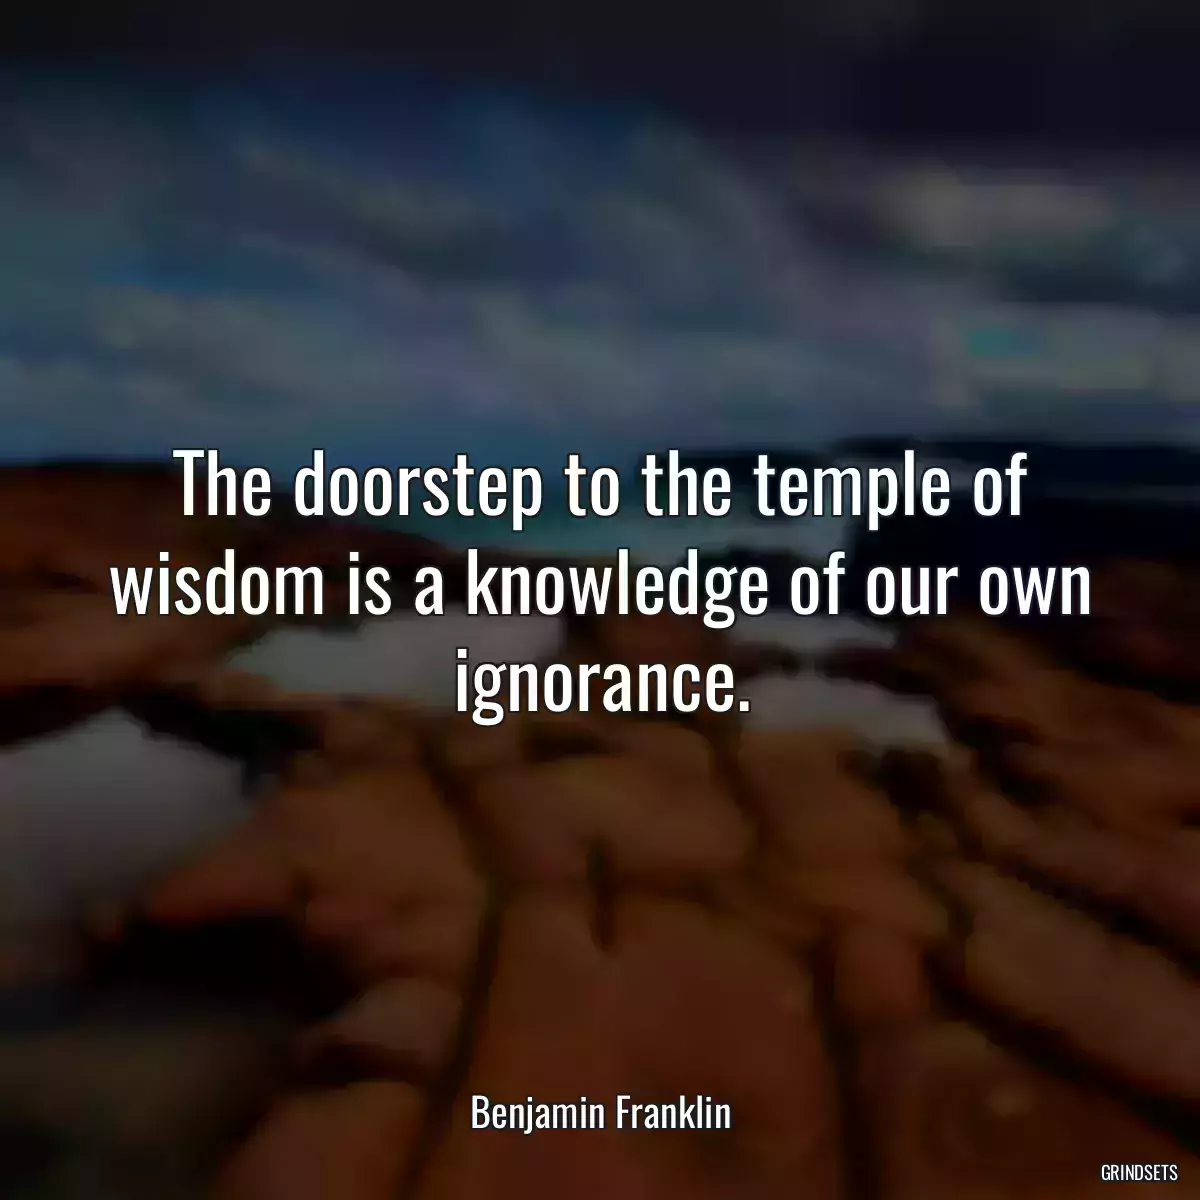 The doorstep to the temple of wisdom is a knowledge of our own ignorance.